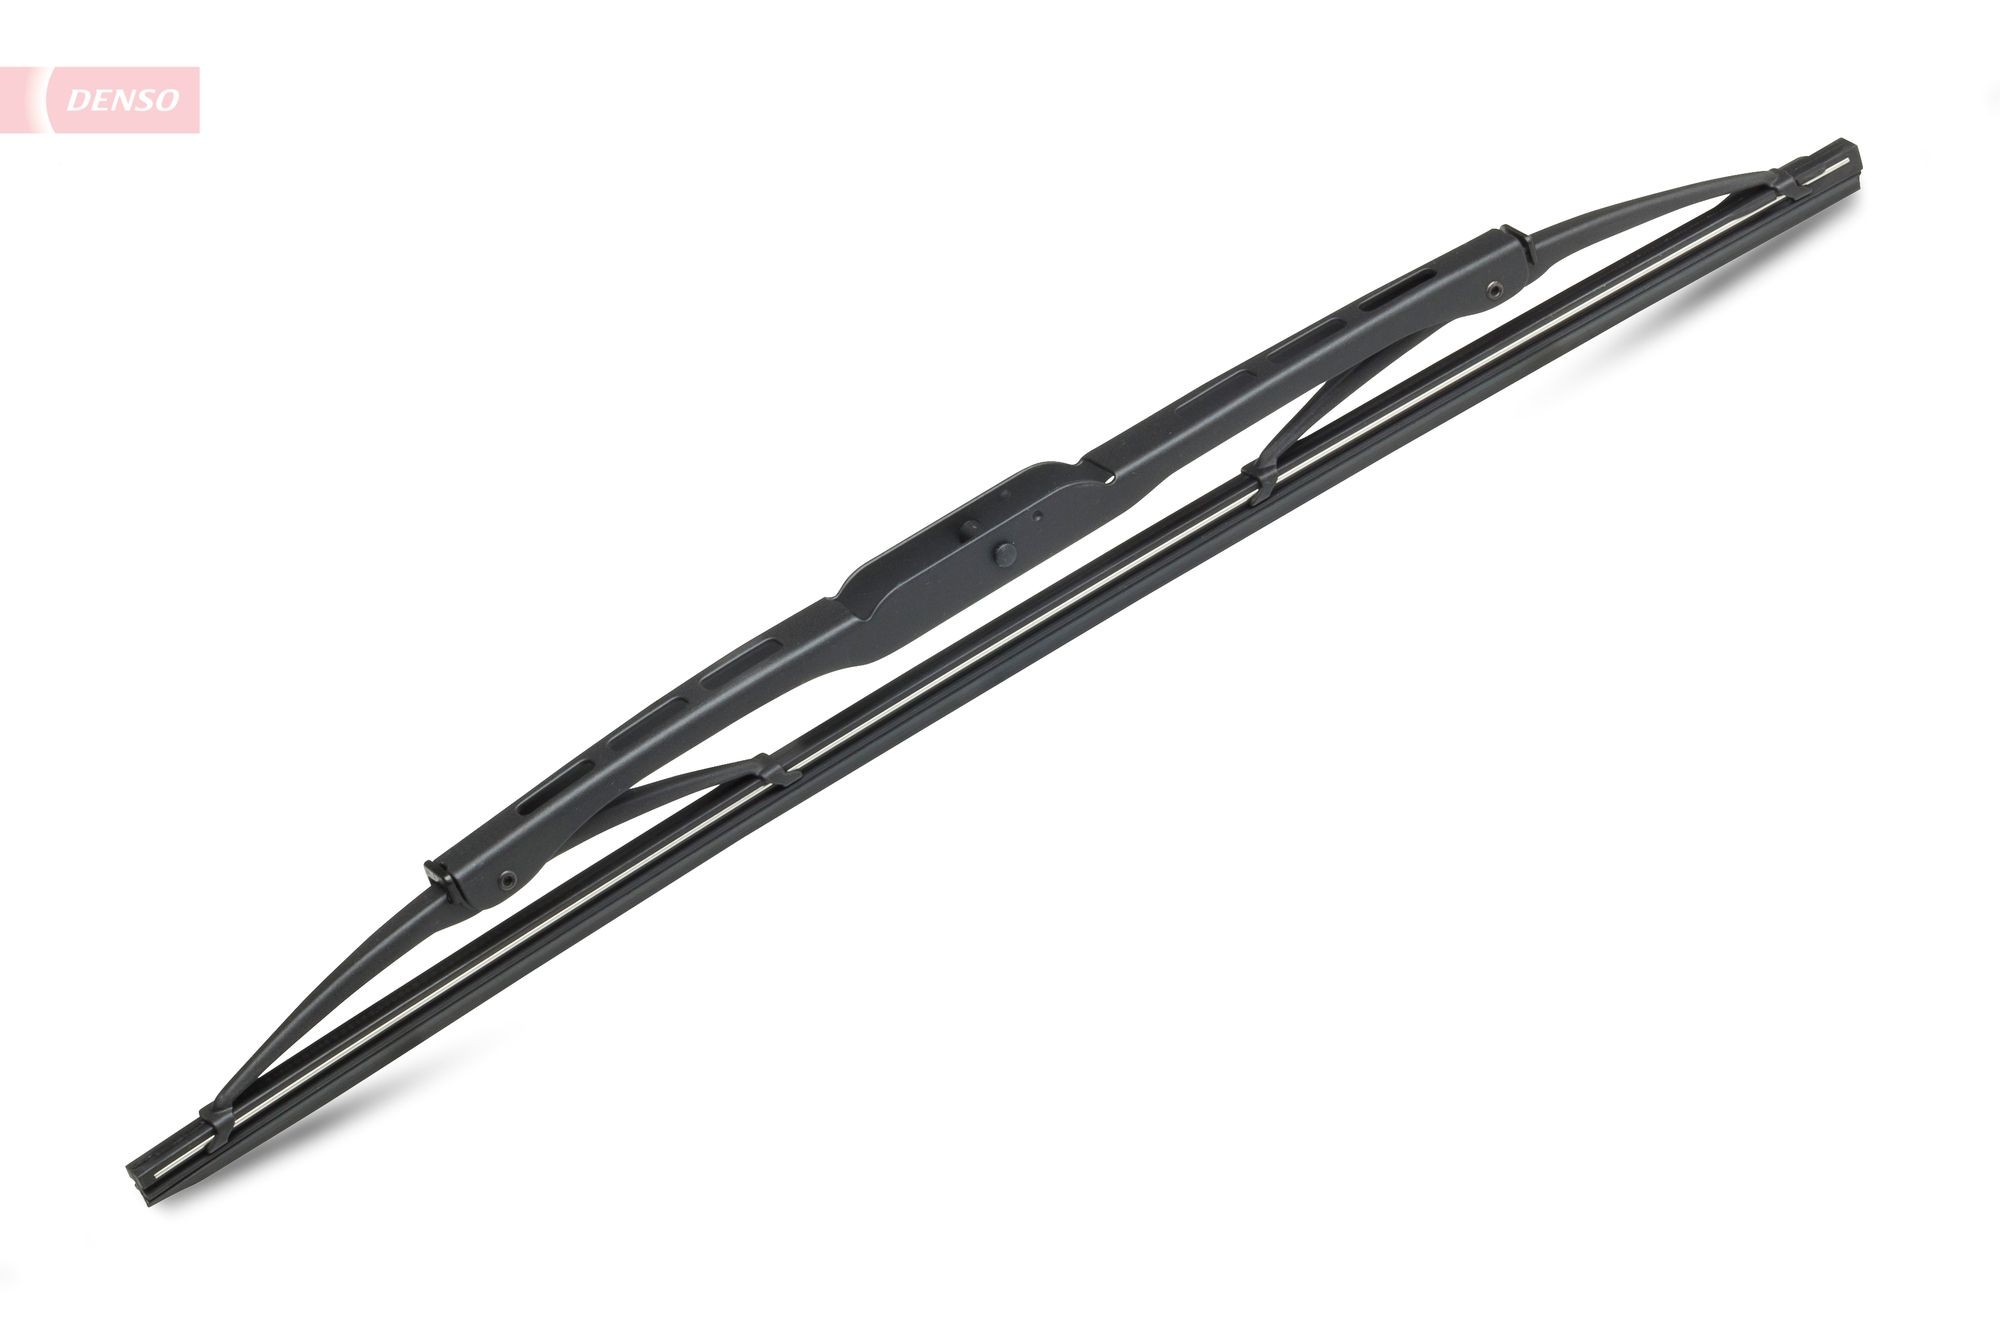 DENSO DM-038 Rear wiper blade PEUGEOT experience and price